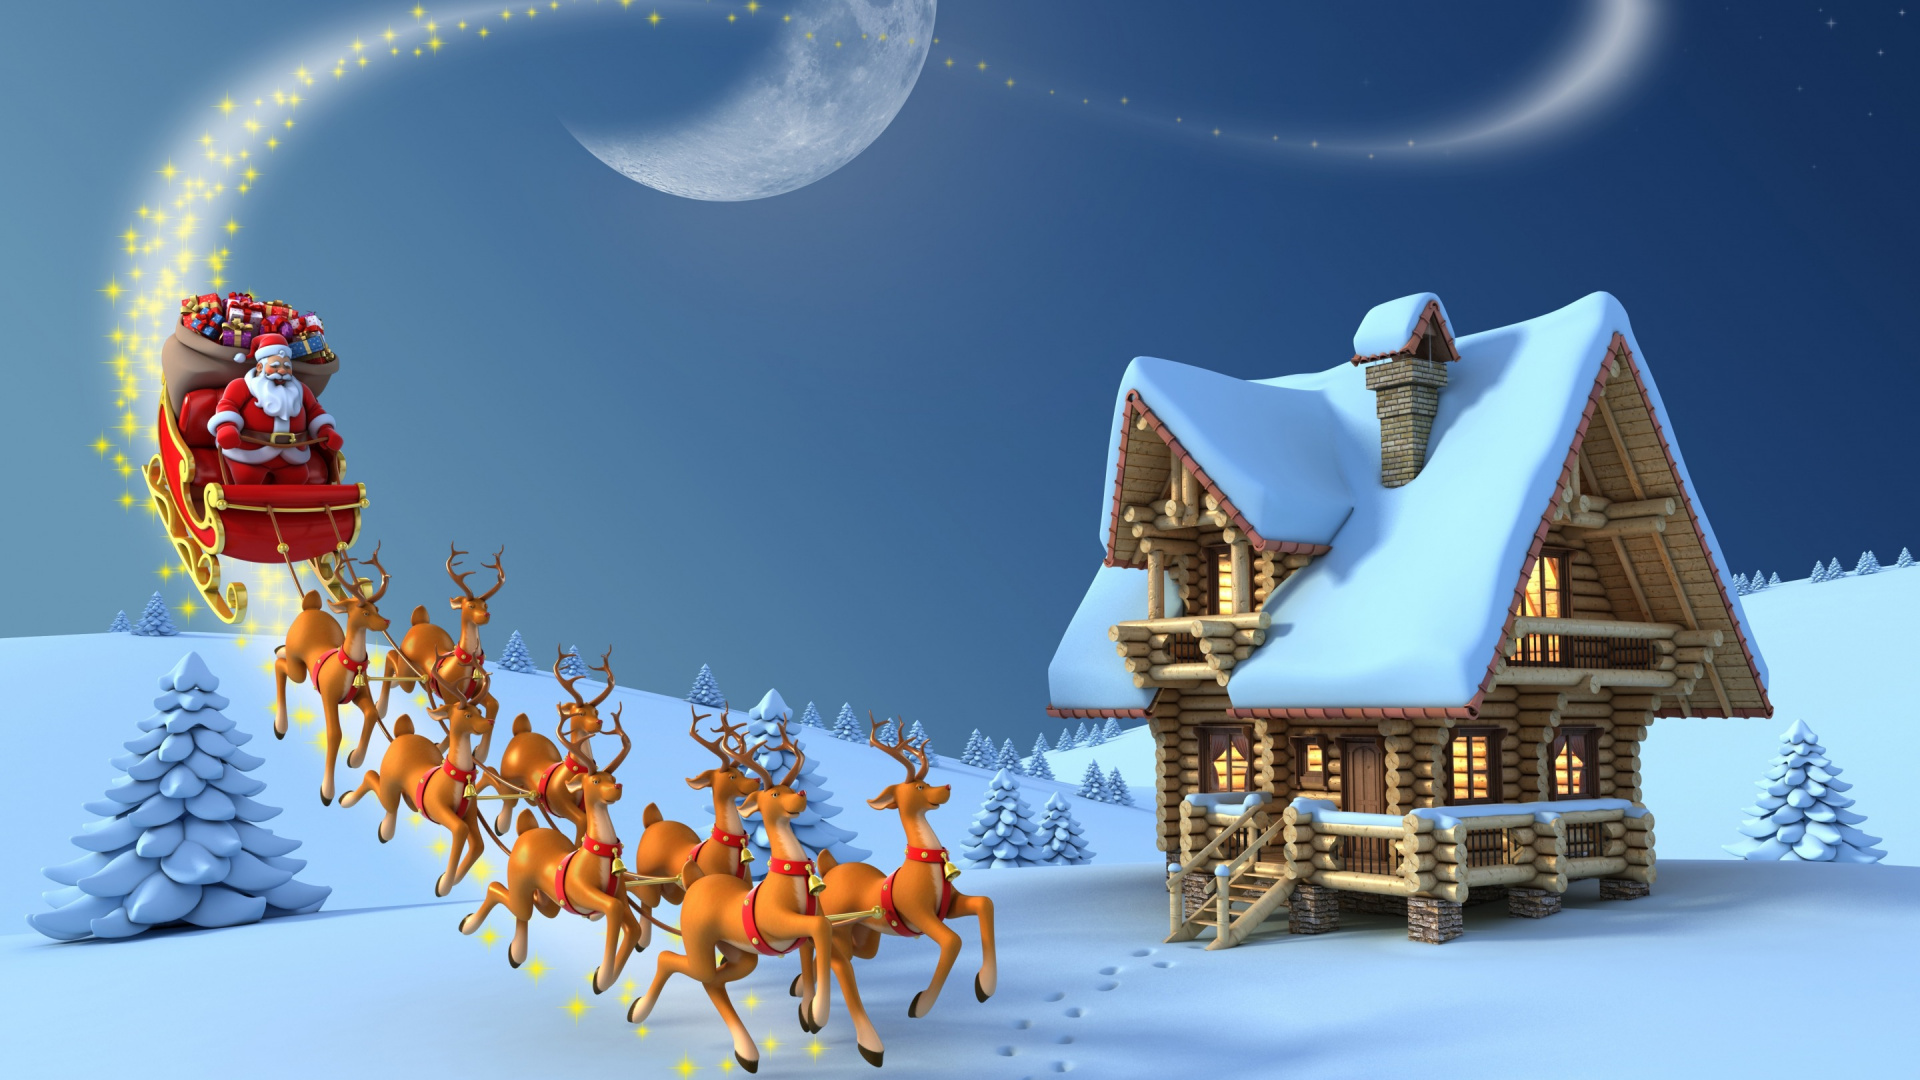 Reindeer, Santa Claus, Christmas Day, Snow, Sled. Wallpaper in 1920x1080 Resolution